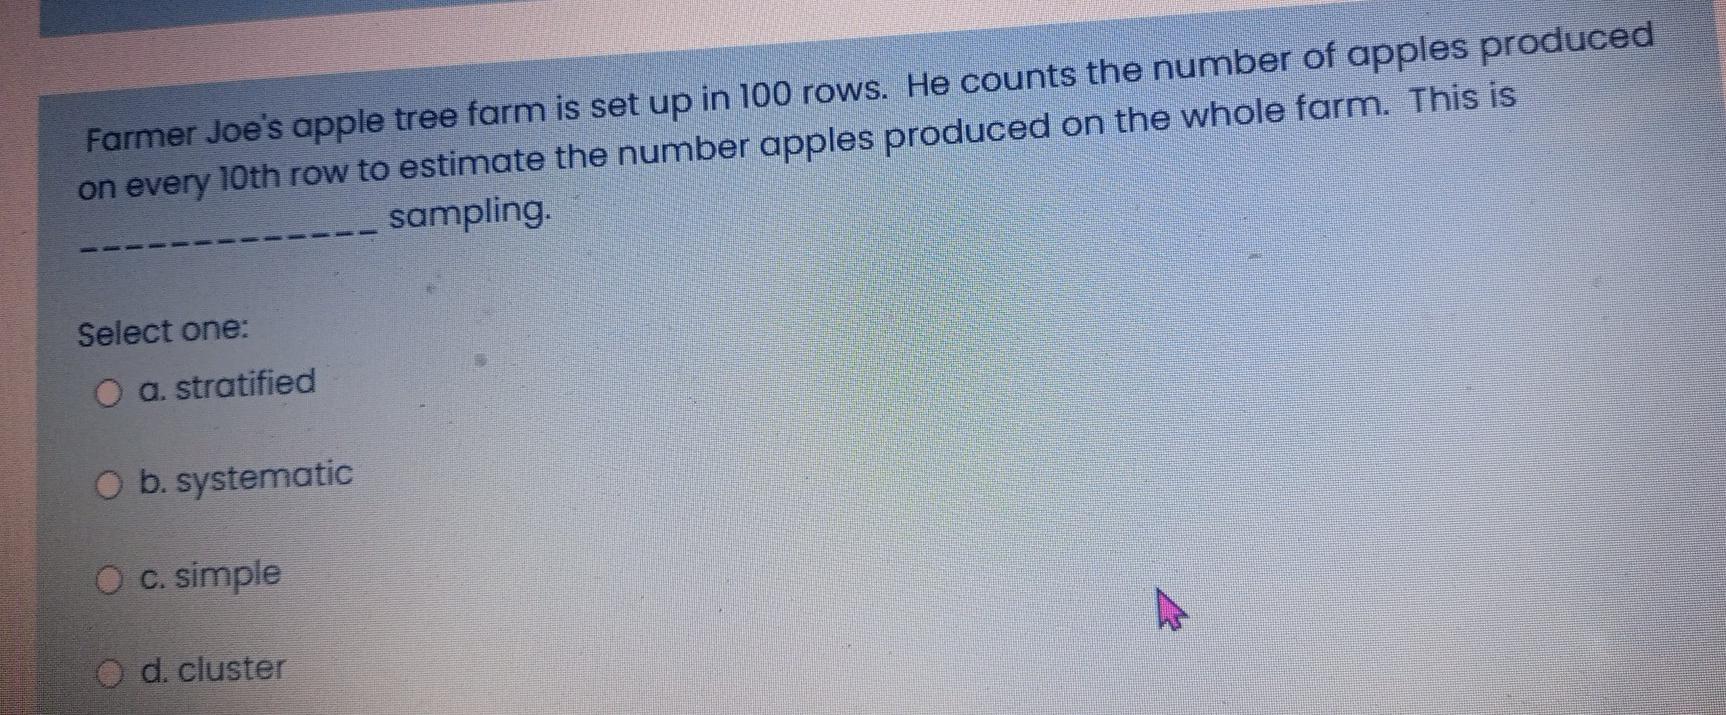 Farmer Joe S Apple Tree Farm Is Set Up In 100 Rows He Counts The Number Of Apples Produced On Every 10th Row To Estimat 1